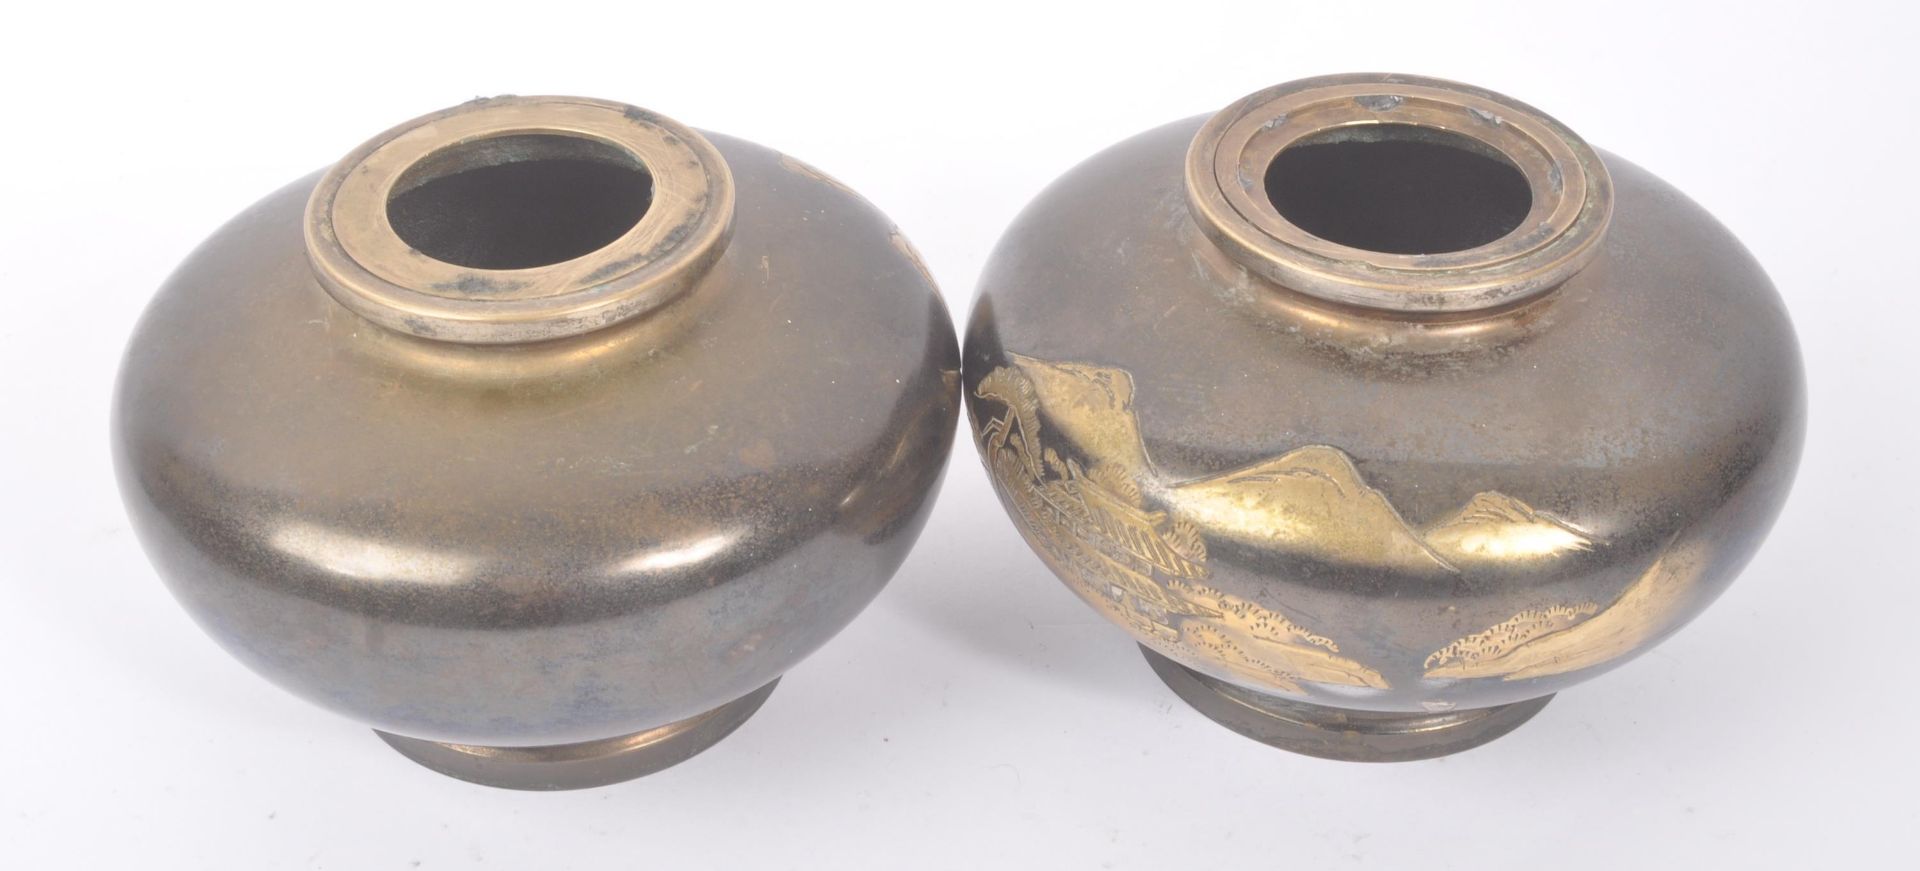 PAIR OF EARLY 20TH CENTURY JAPANESE BRASS VASES - Image 7 of 7